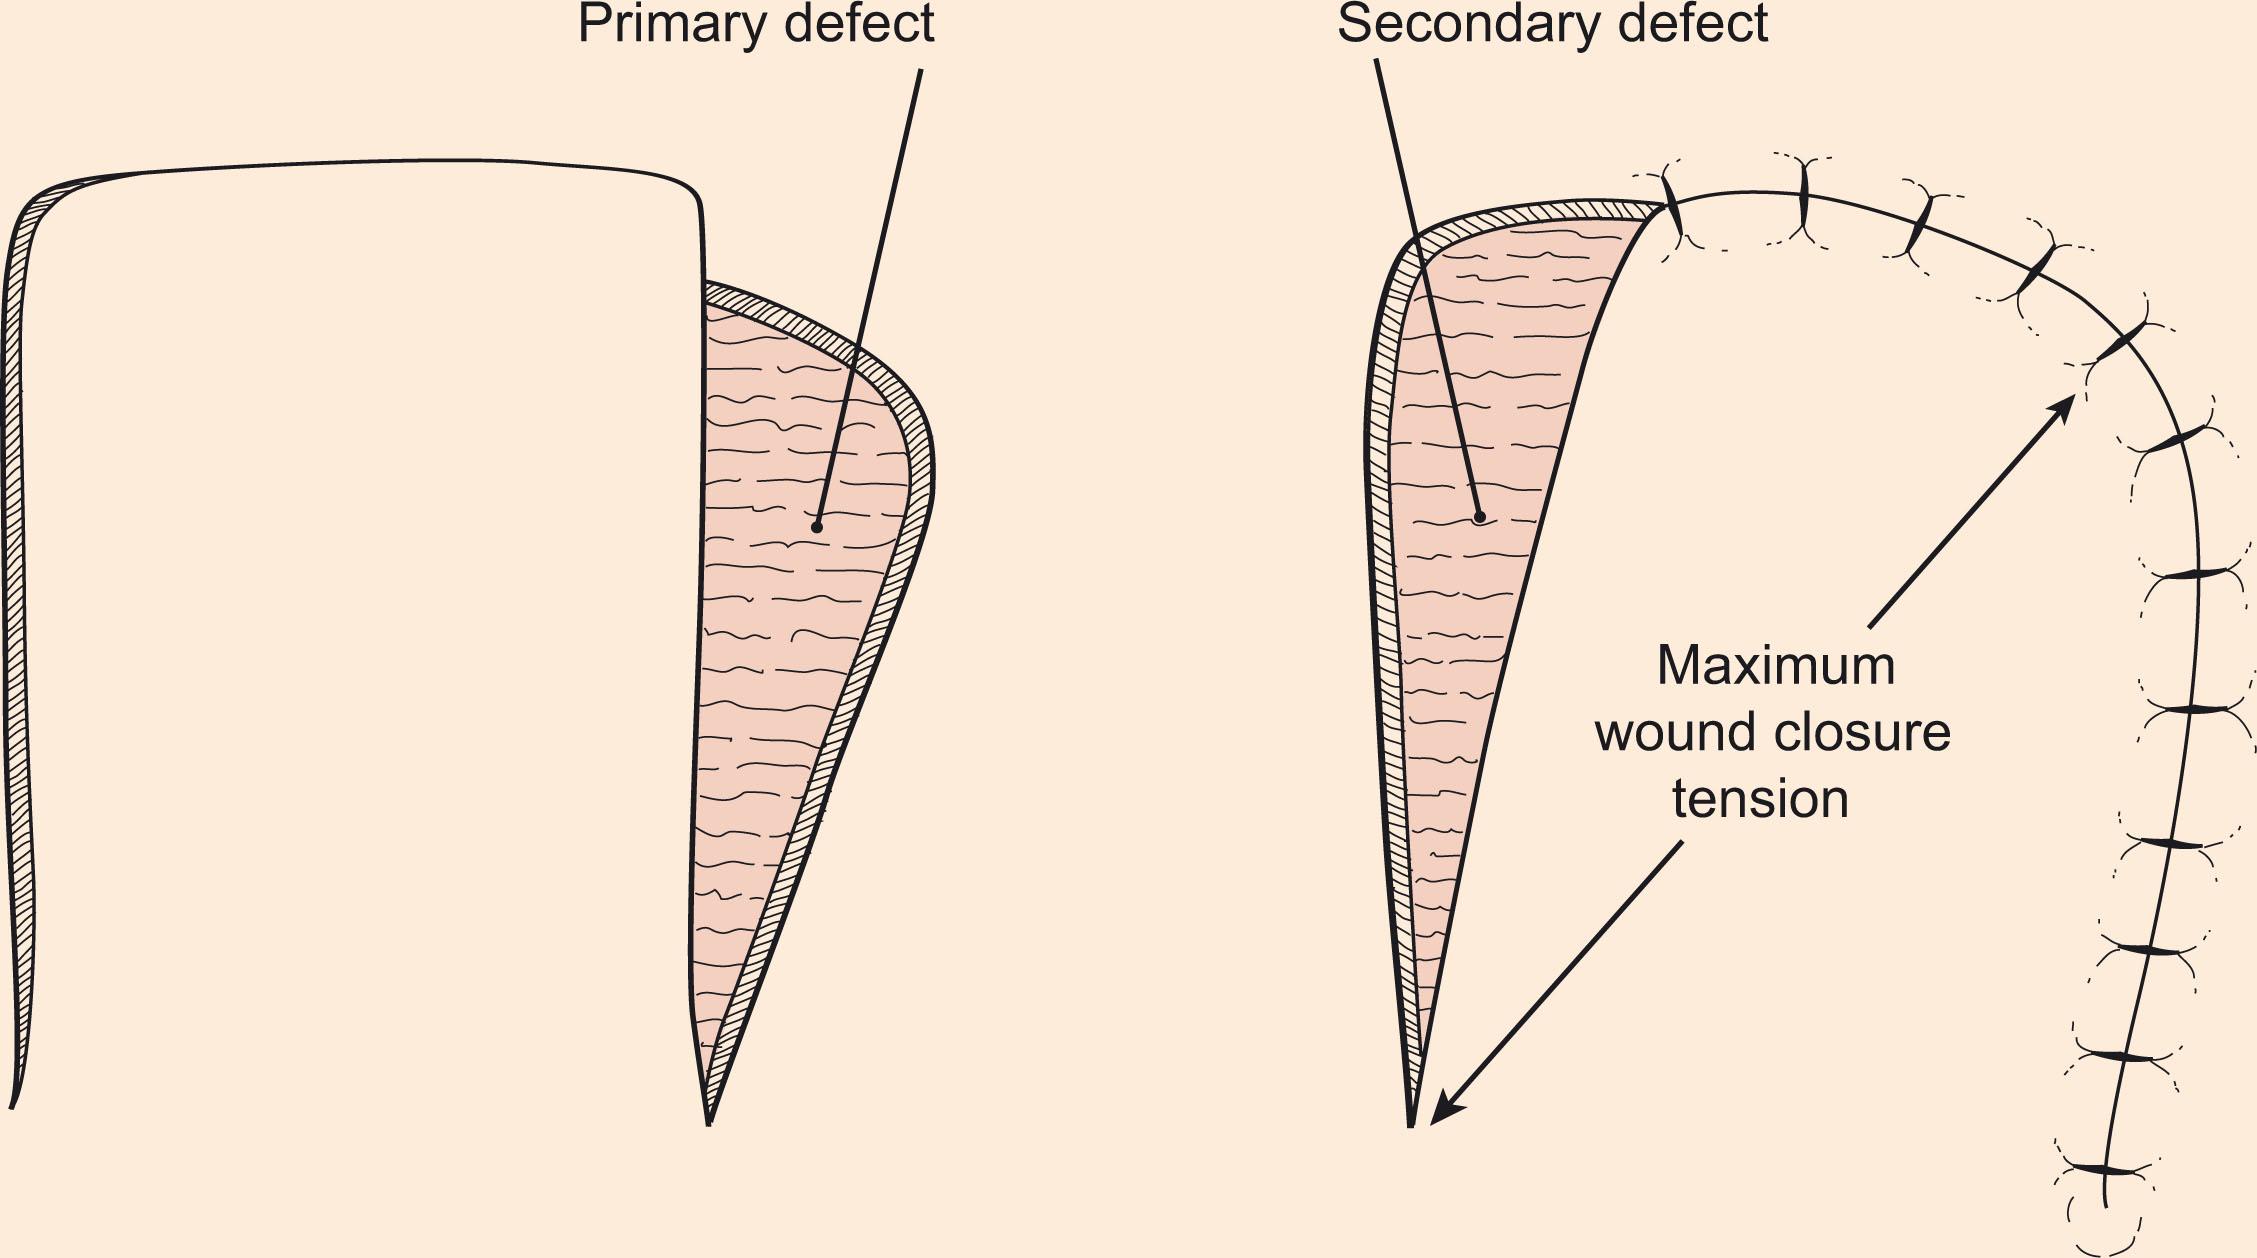 Figure 10.3, Primary vs. secondary defect. The movement of the cutaneous flap used to repair the primary defect (recipient site) results in a secondary defect (donor site).